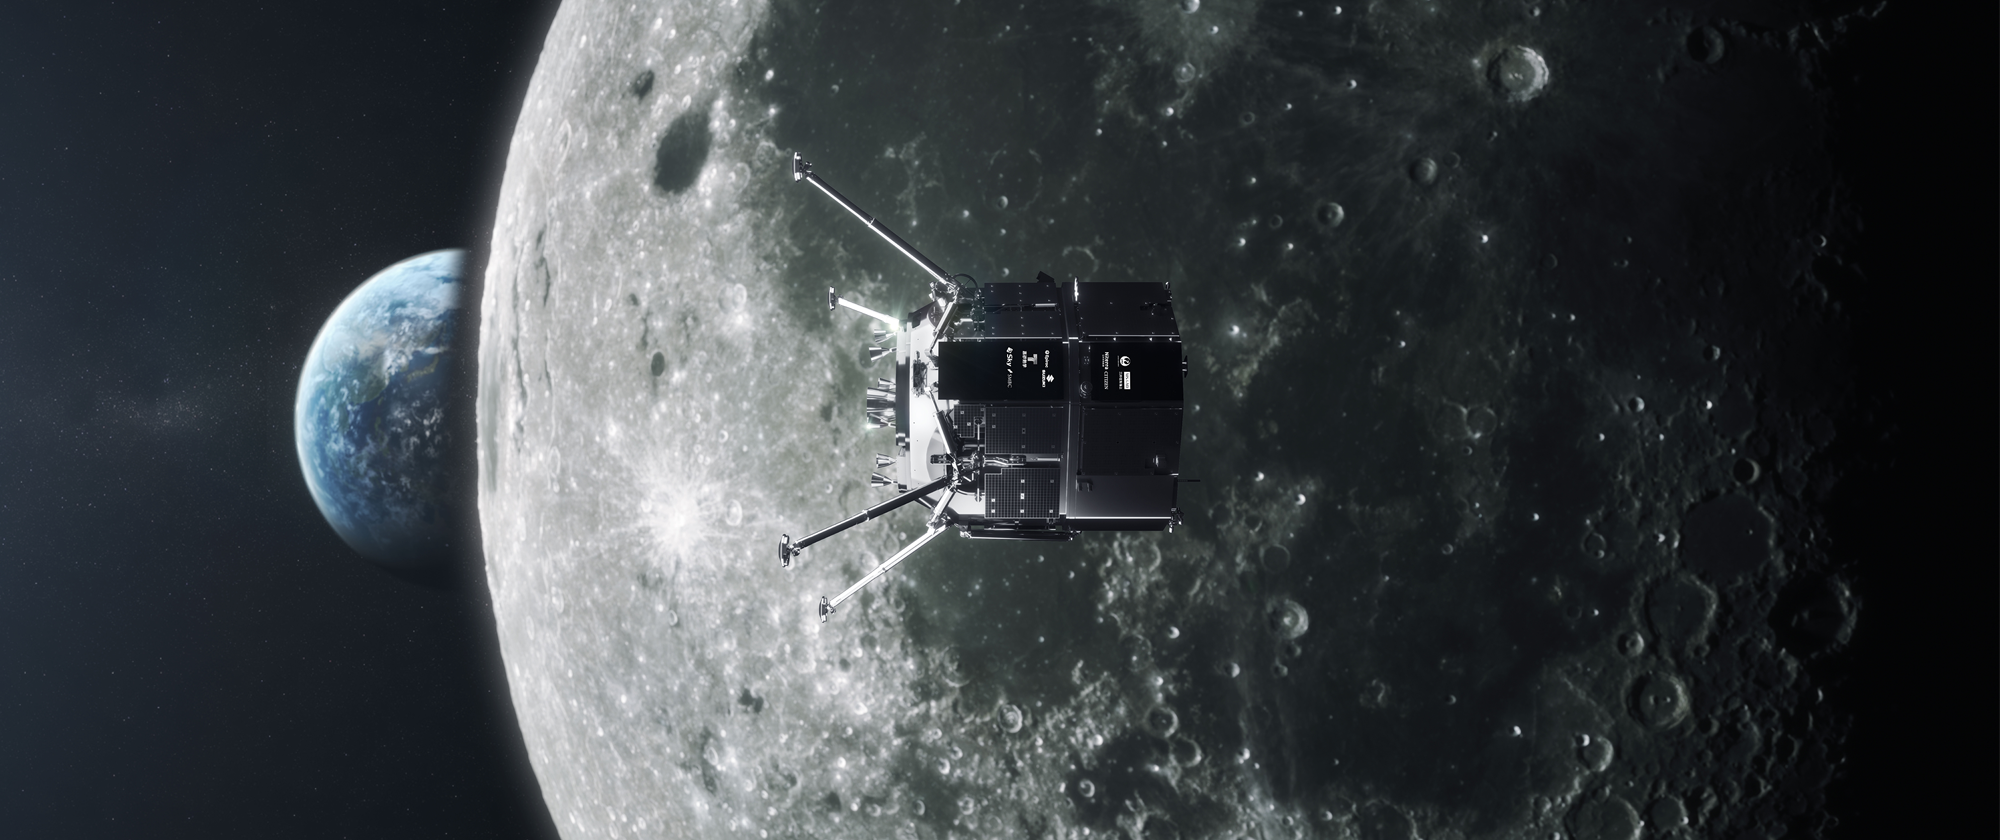 A small commercial lunar lander used for delivering customer payloads to the Moon.